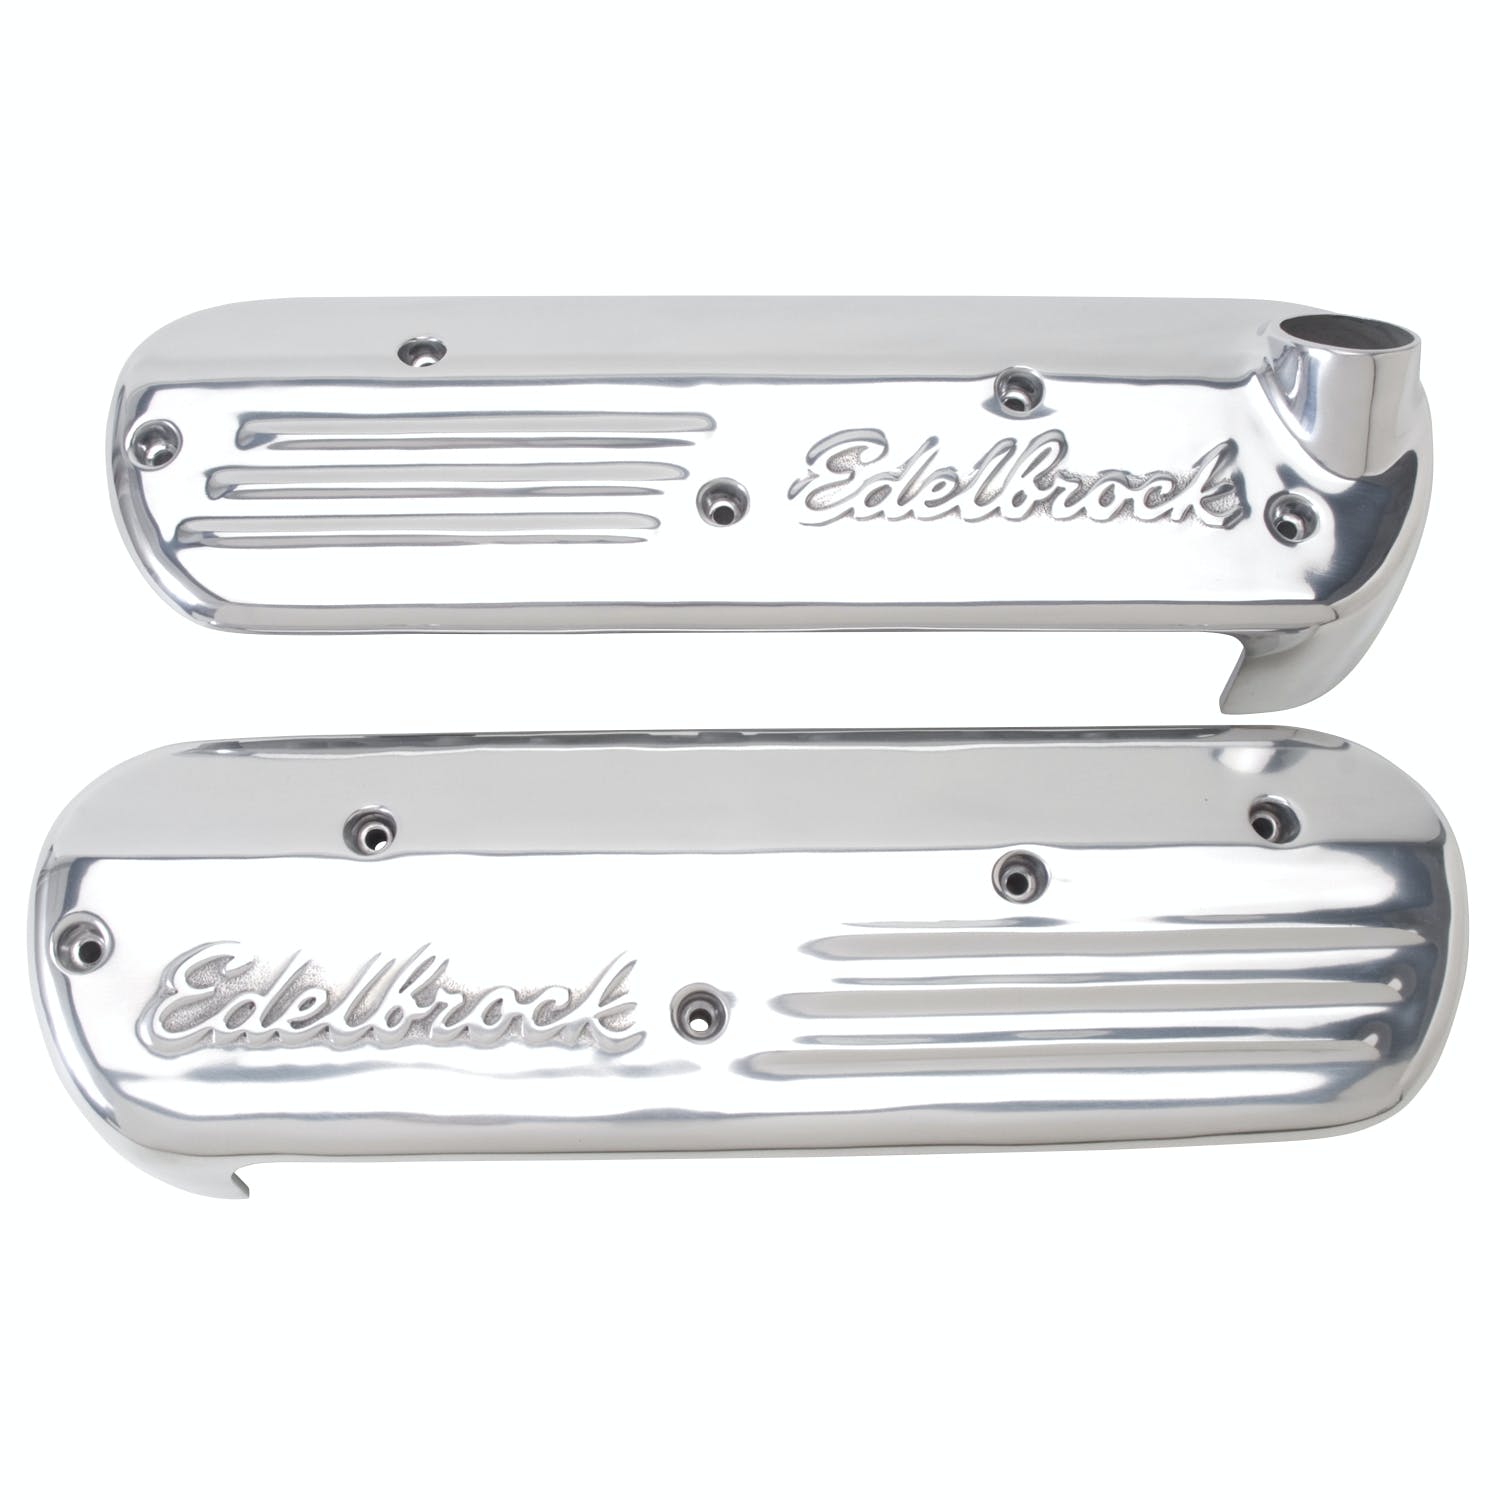 Edelbrock 41181 LS Series Coil Covers in Polished Finish (3-3/8 Overall Height)